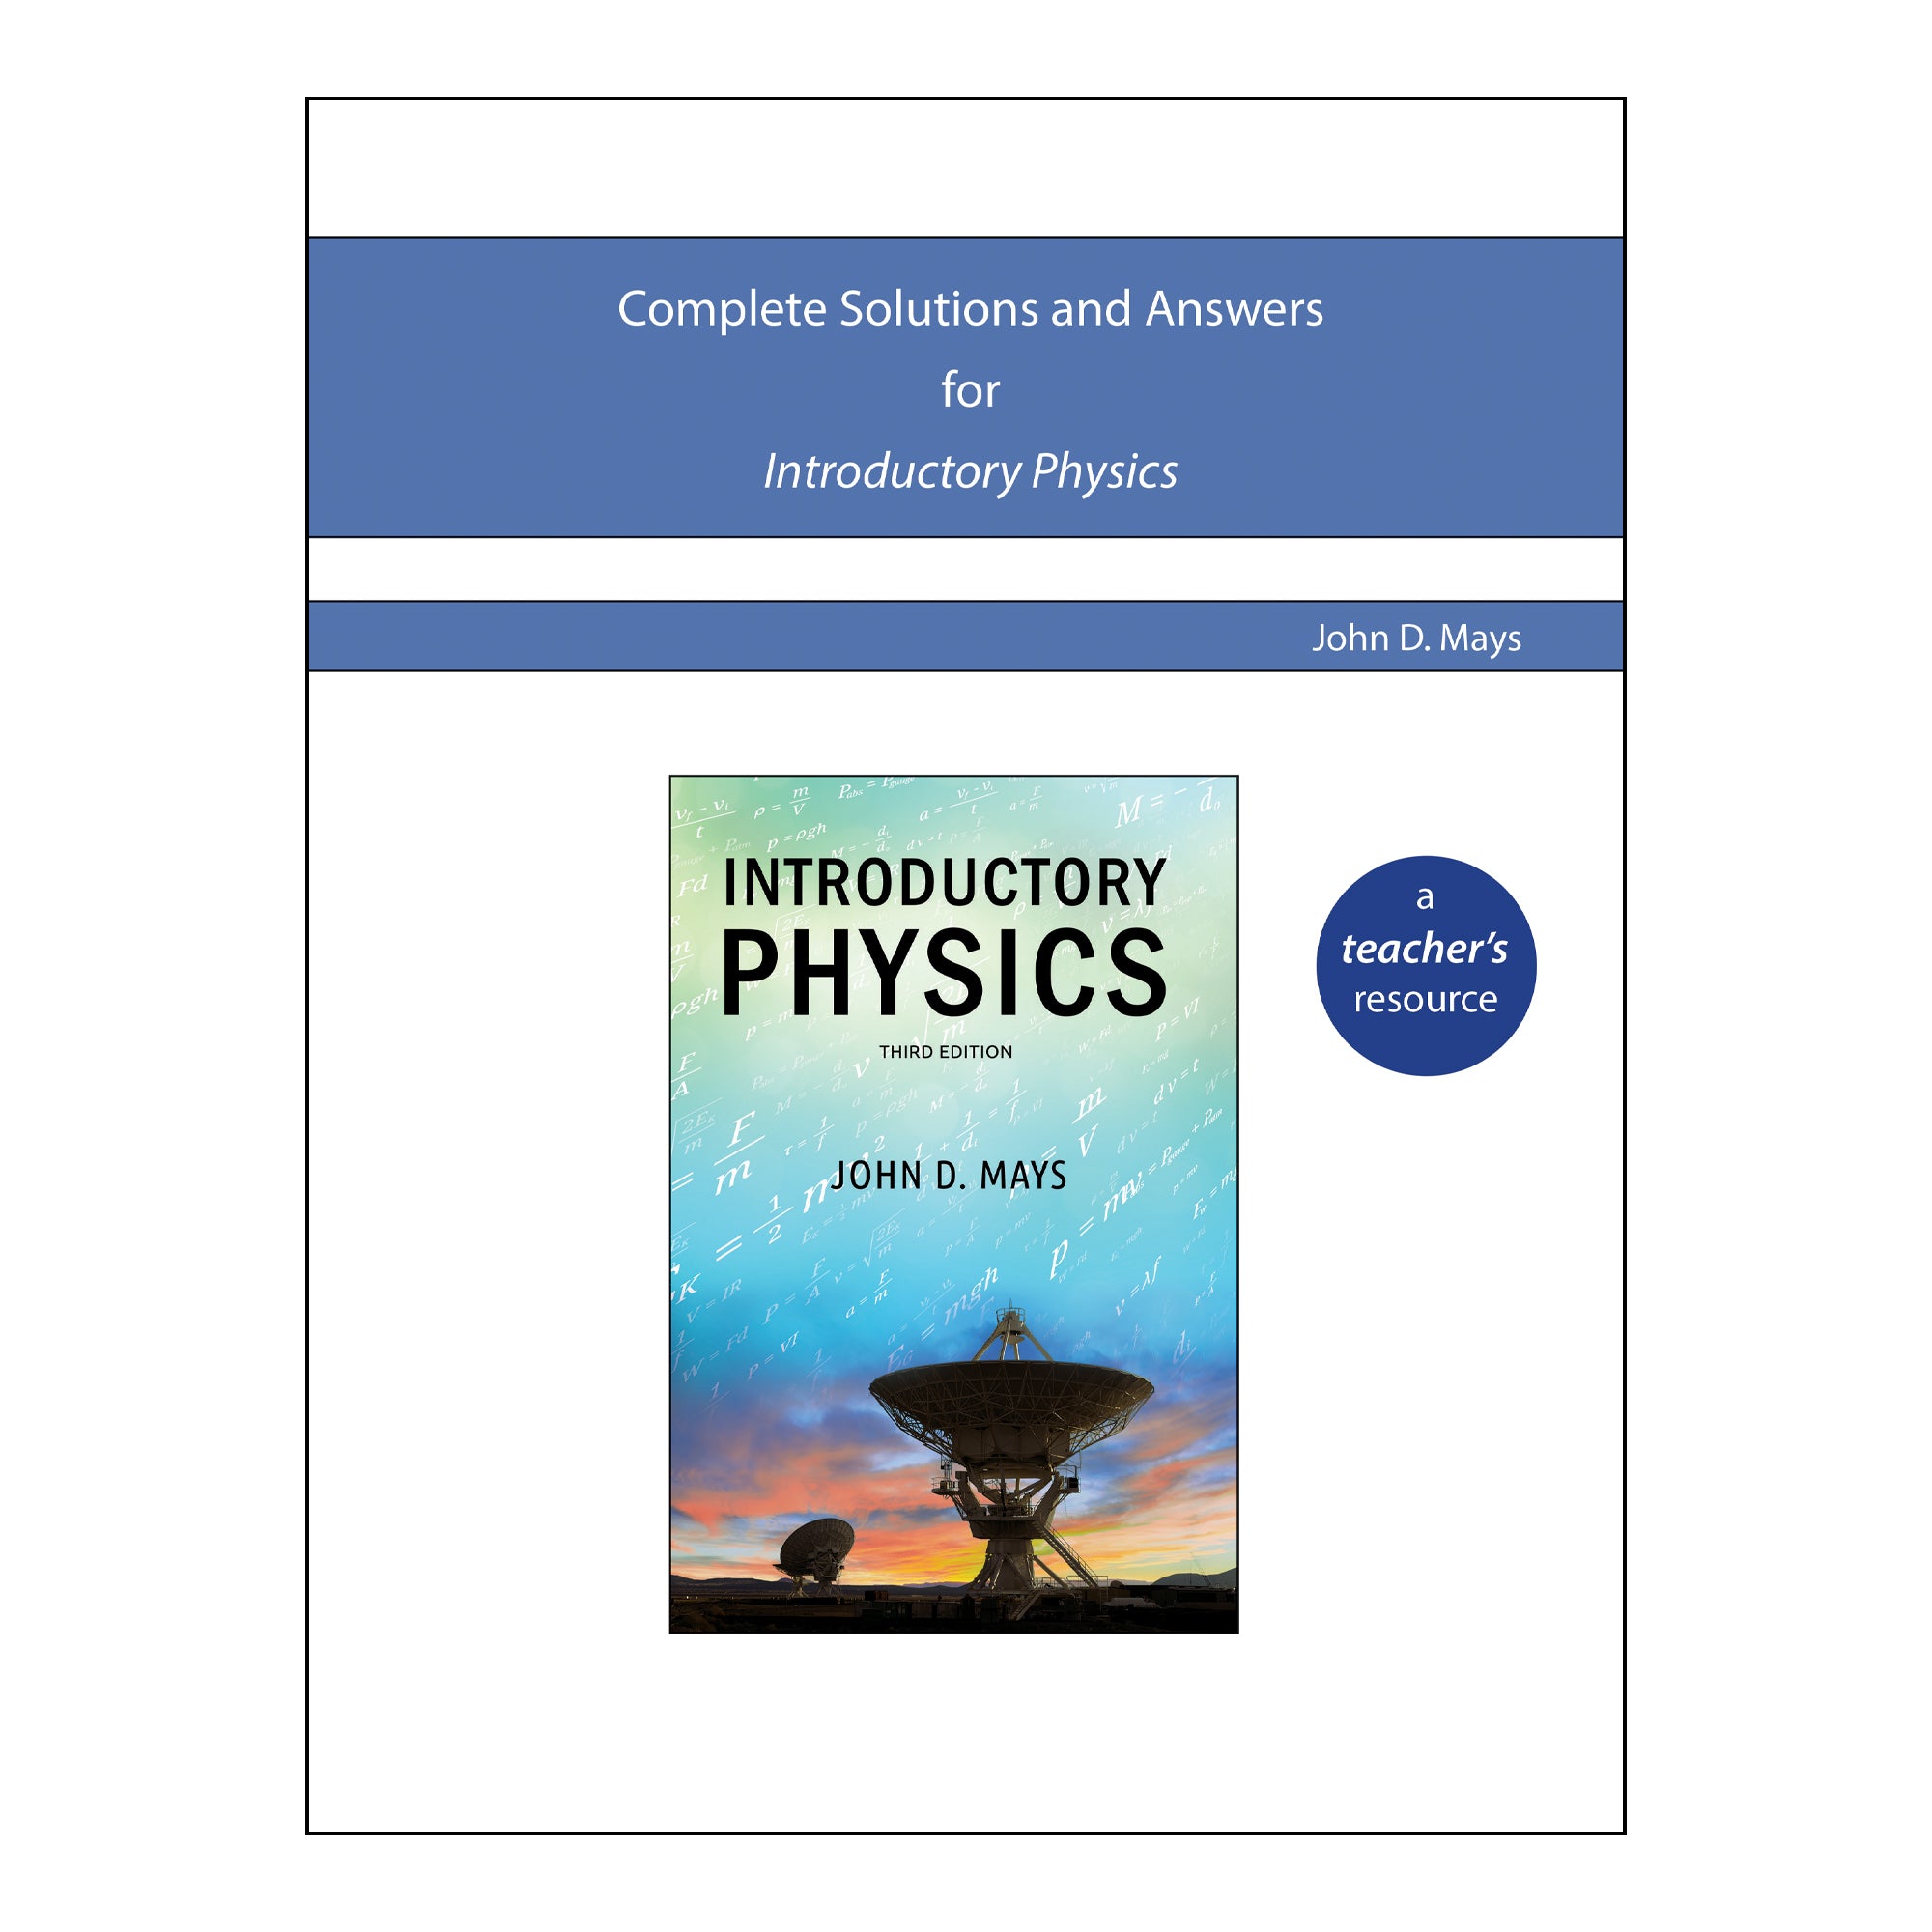 Solutions for Introductory Physics cover in white with blue stripes. On the cover is an image of the Introductory Physics cover that shows a sunset background with 2 large satellite dishes and in the sky shows different formulas in white.